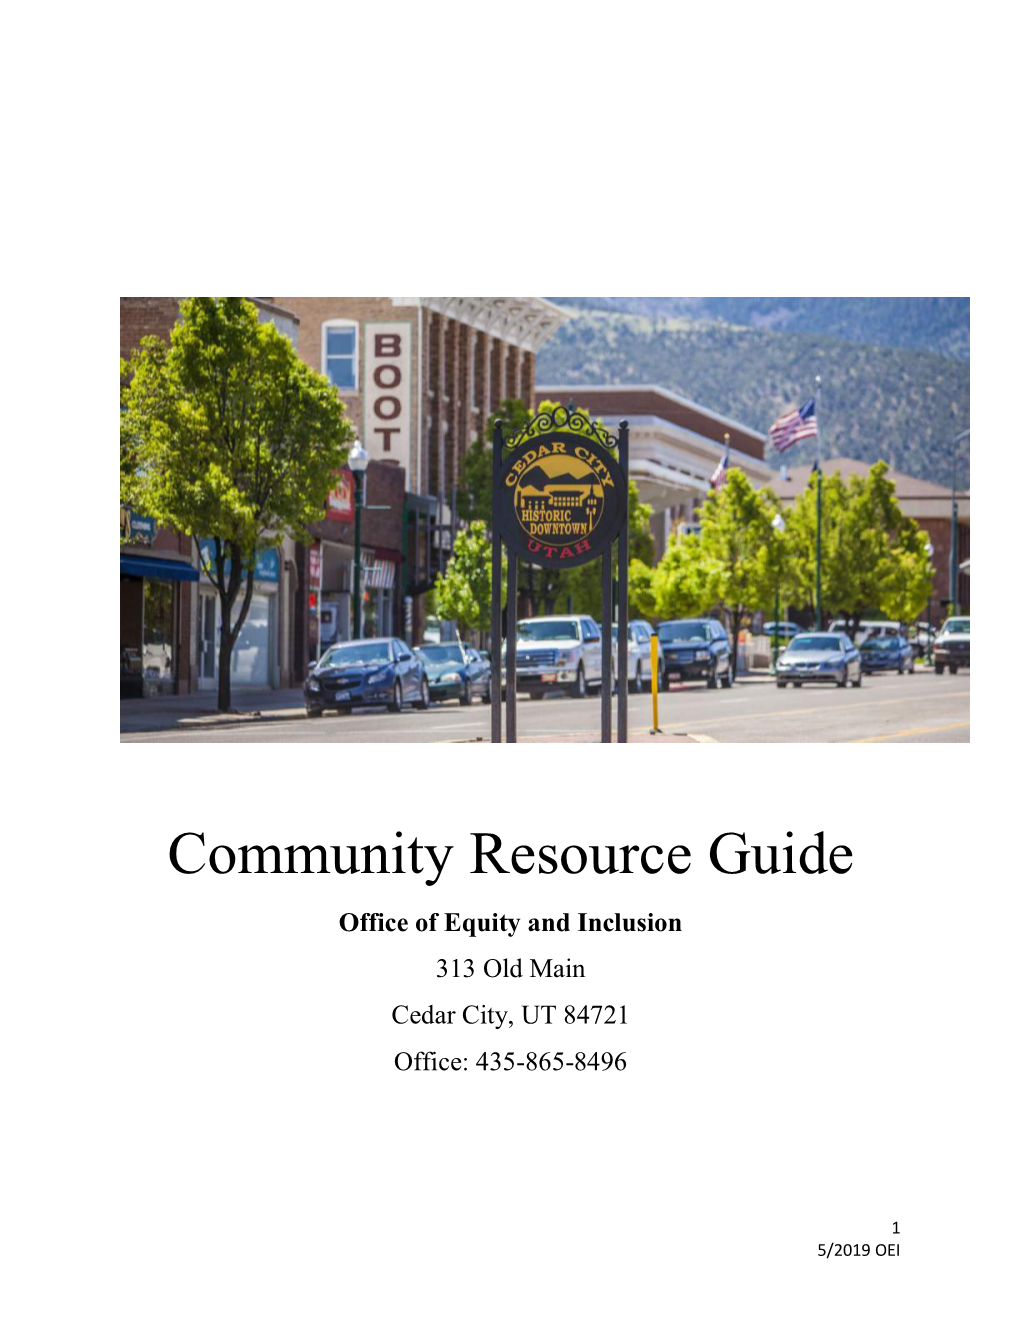 Community Resource Guide Office of Equity and Inclusion 313 Old Main Cedar City, UT 84721 Office: 435-865-8496